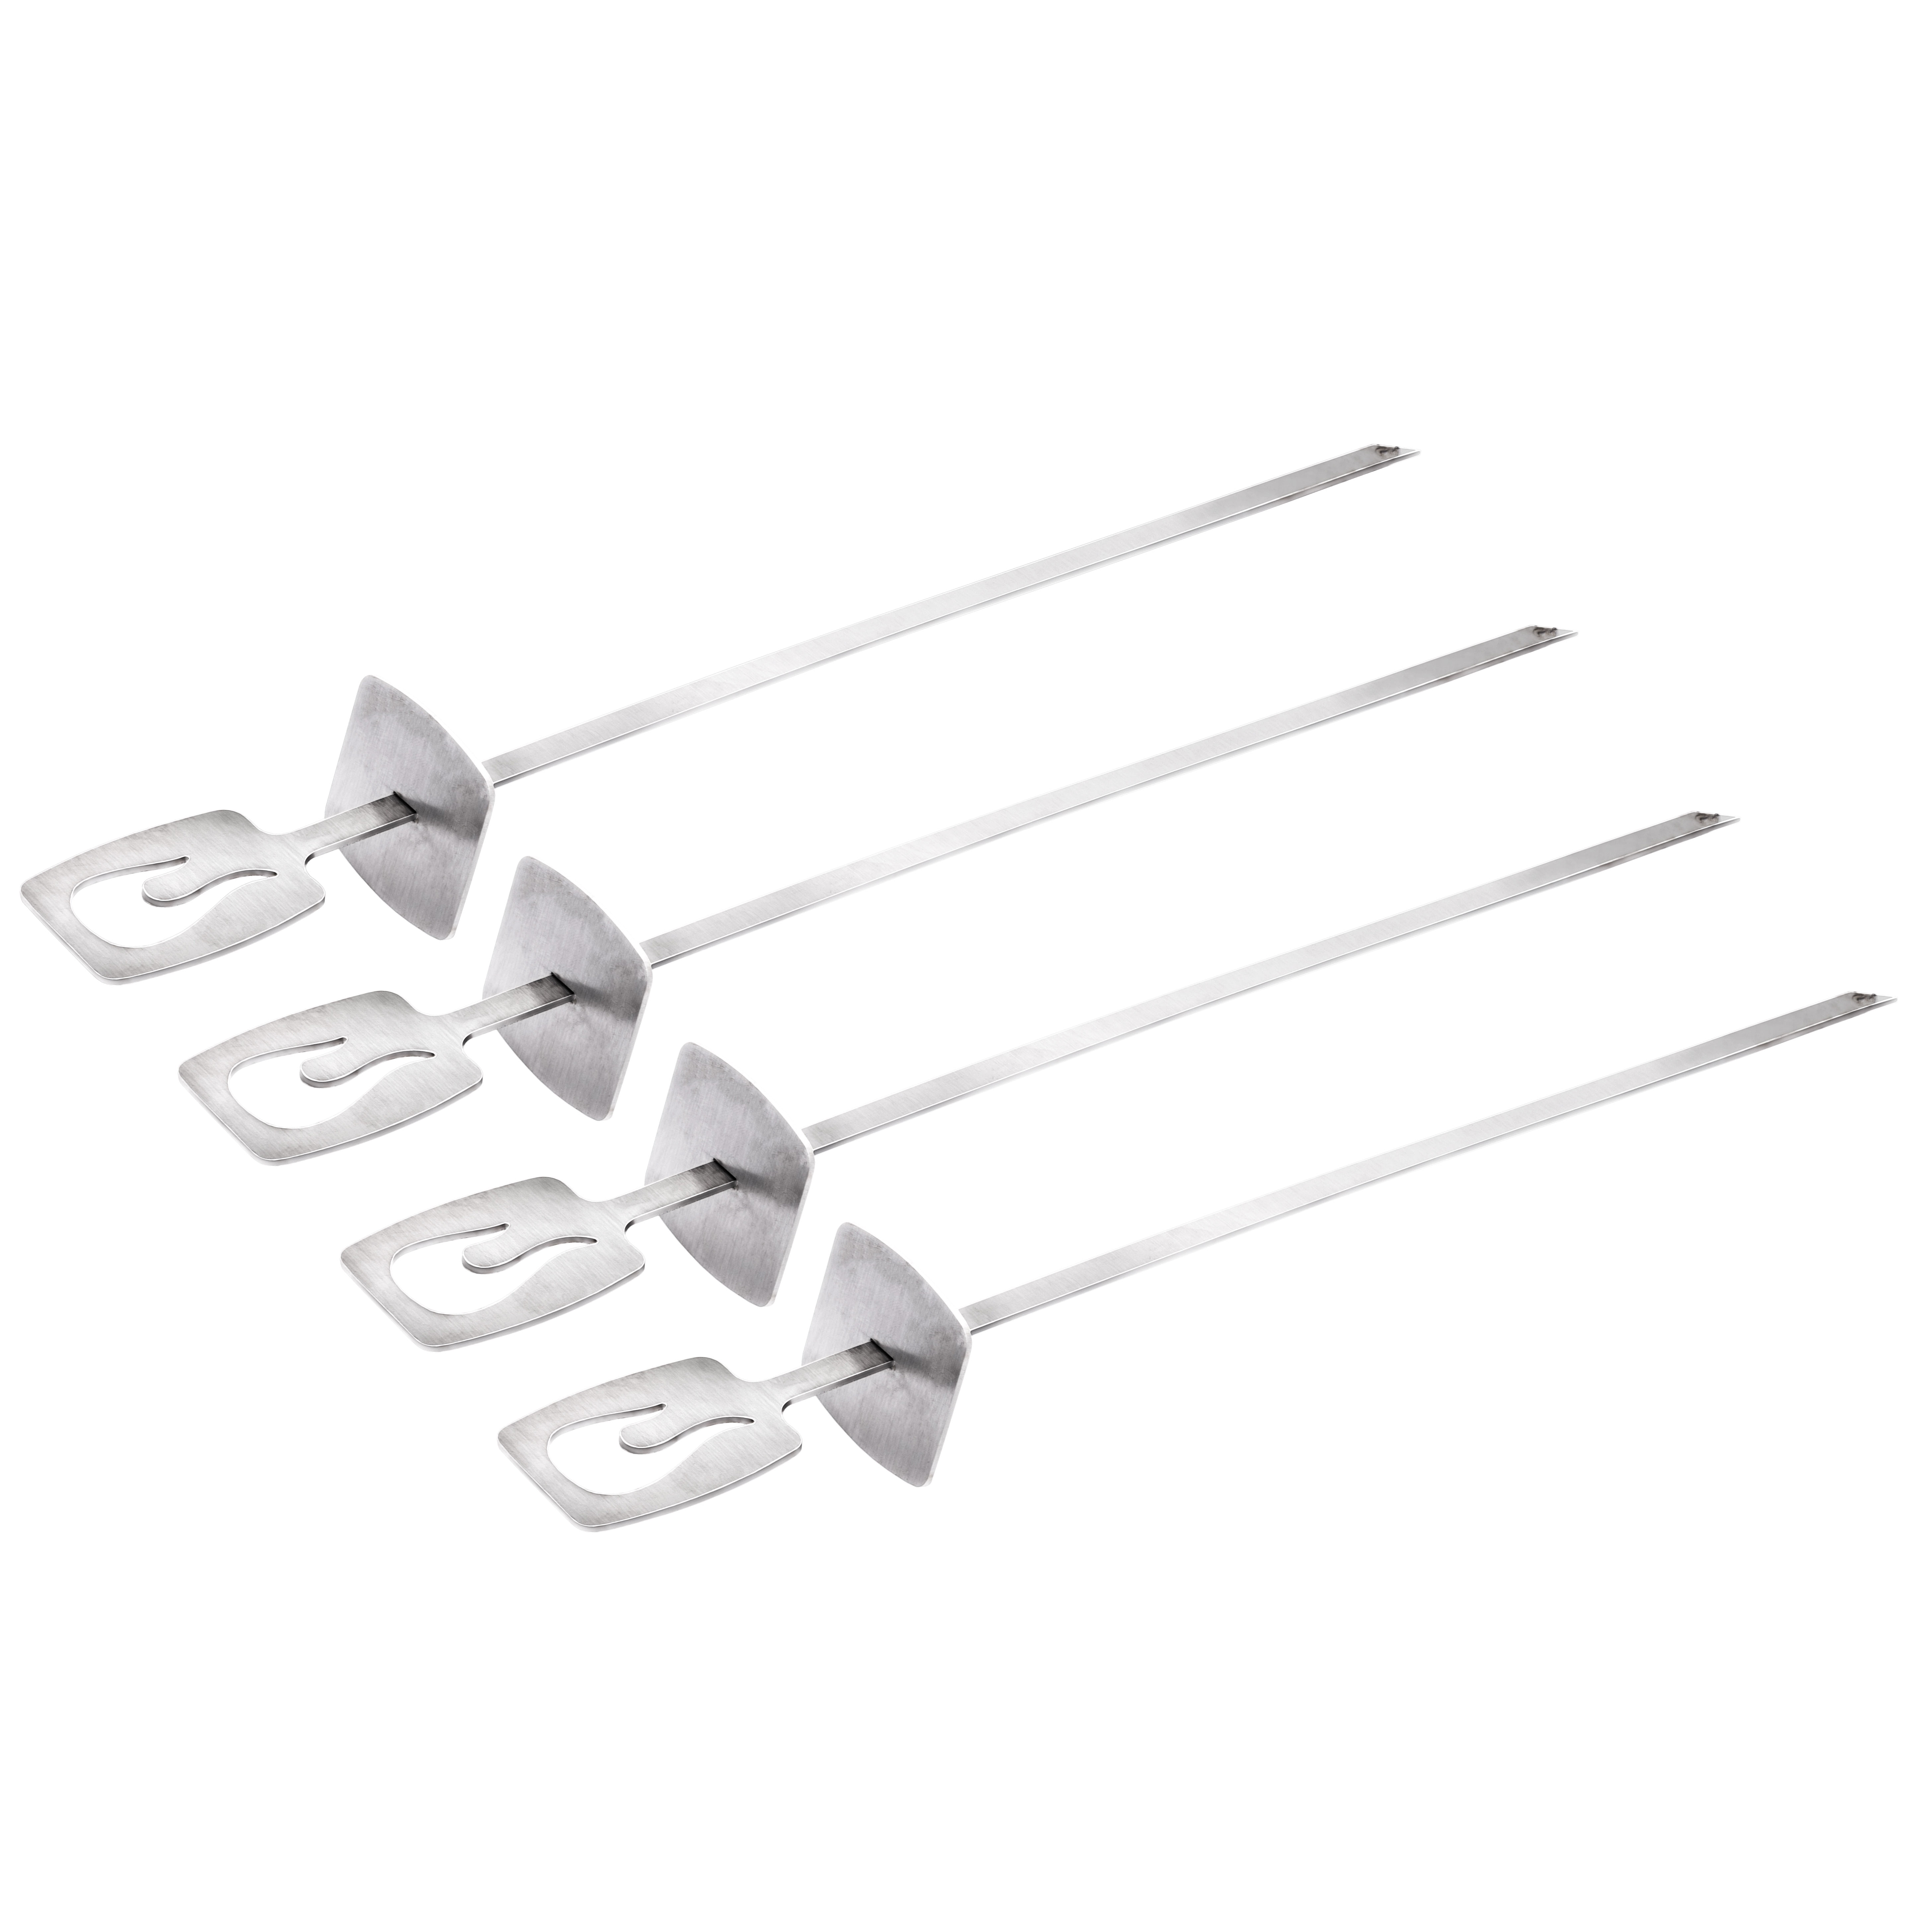 Char-Broil Grill+ 4-Piece Sliding Skewer Set, Stainless Steel